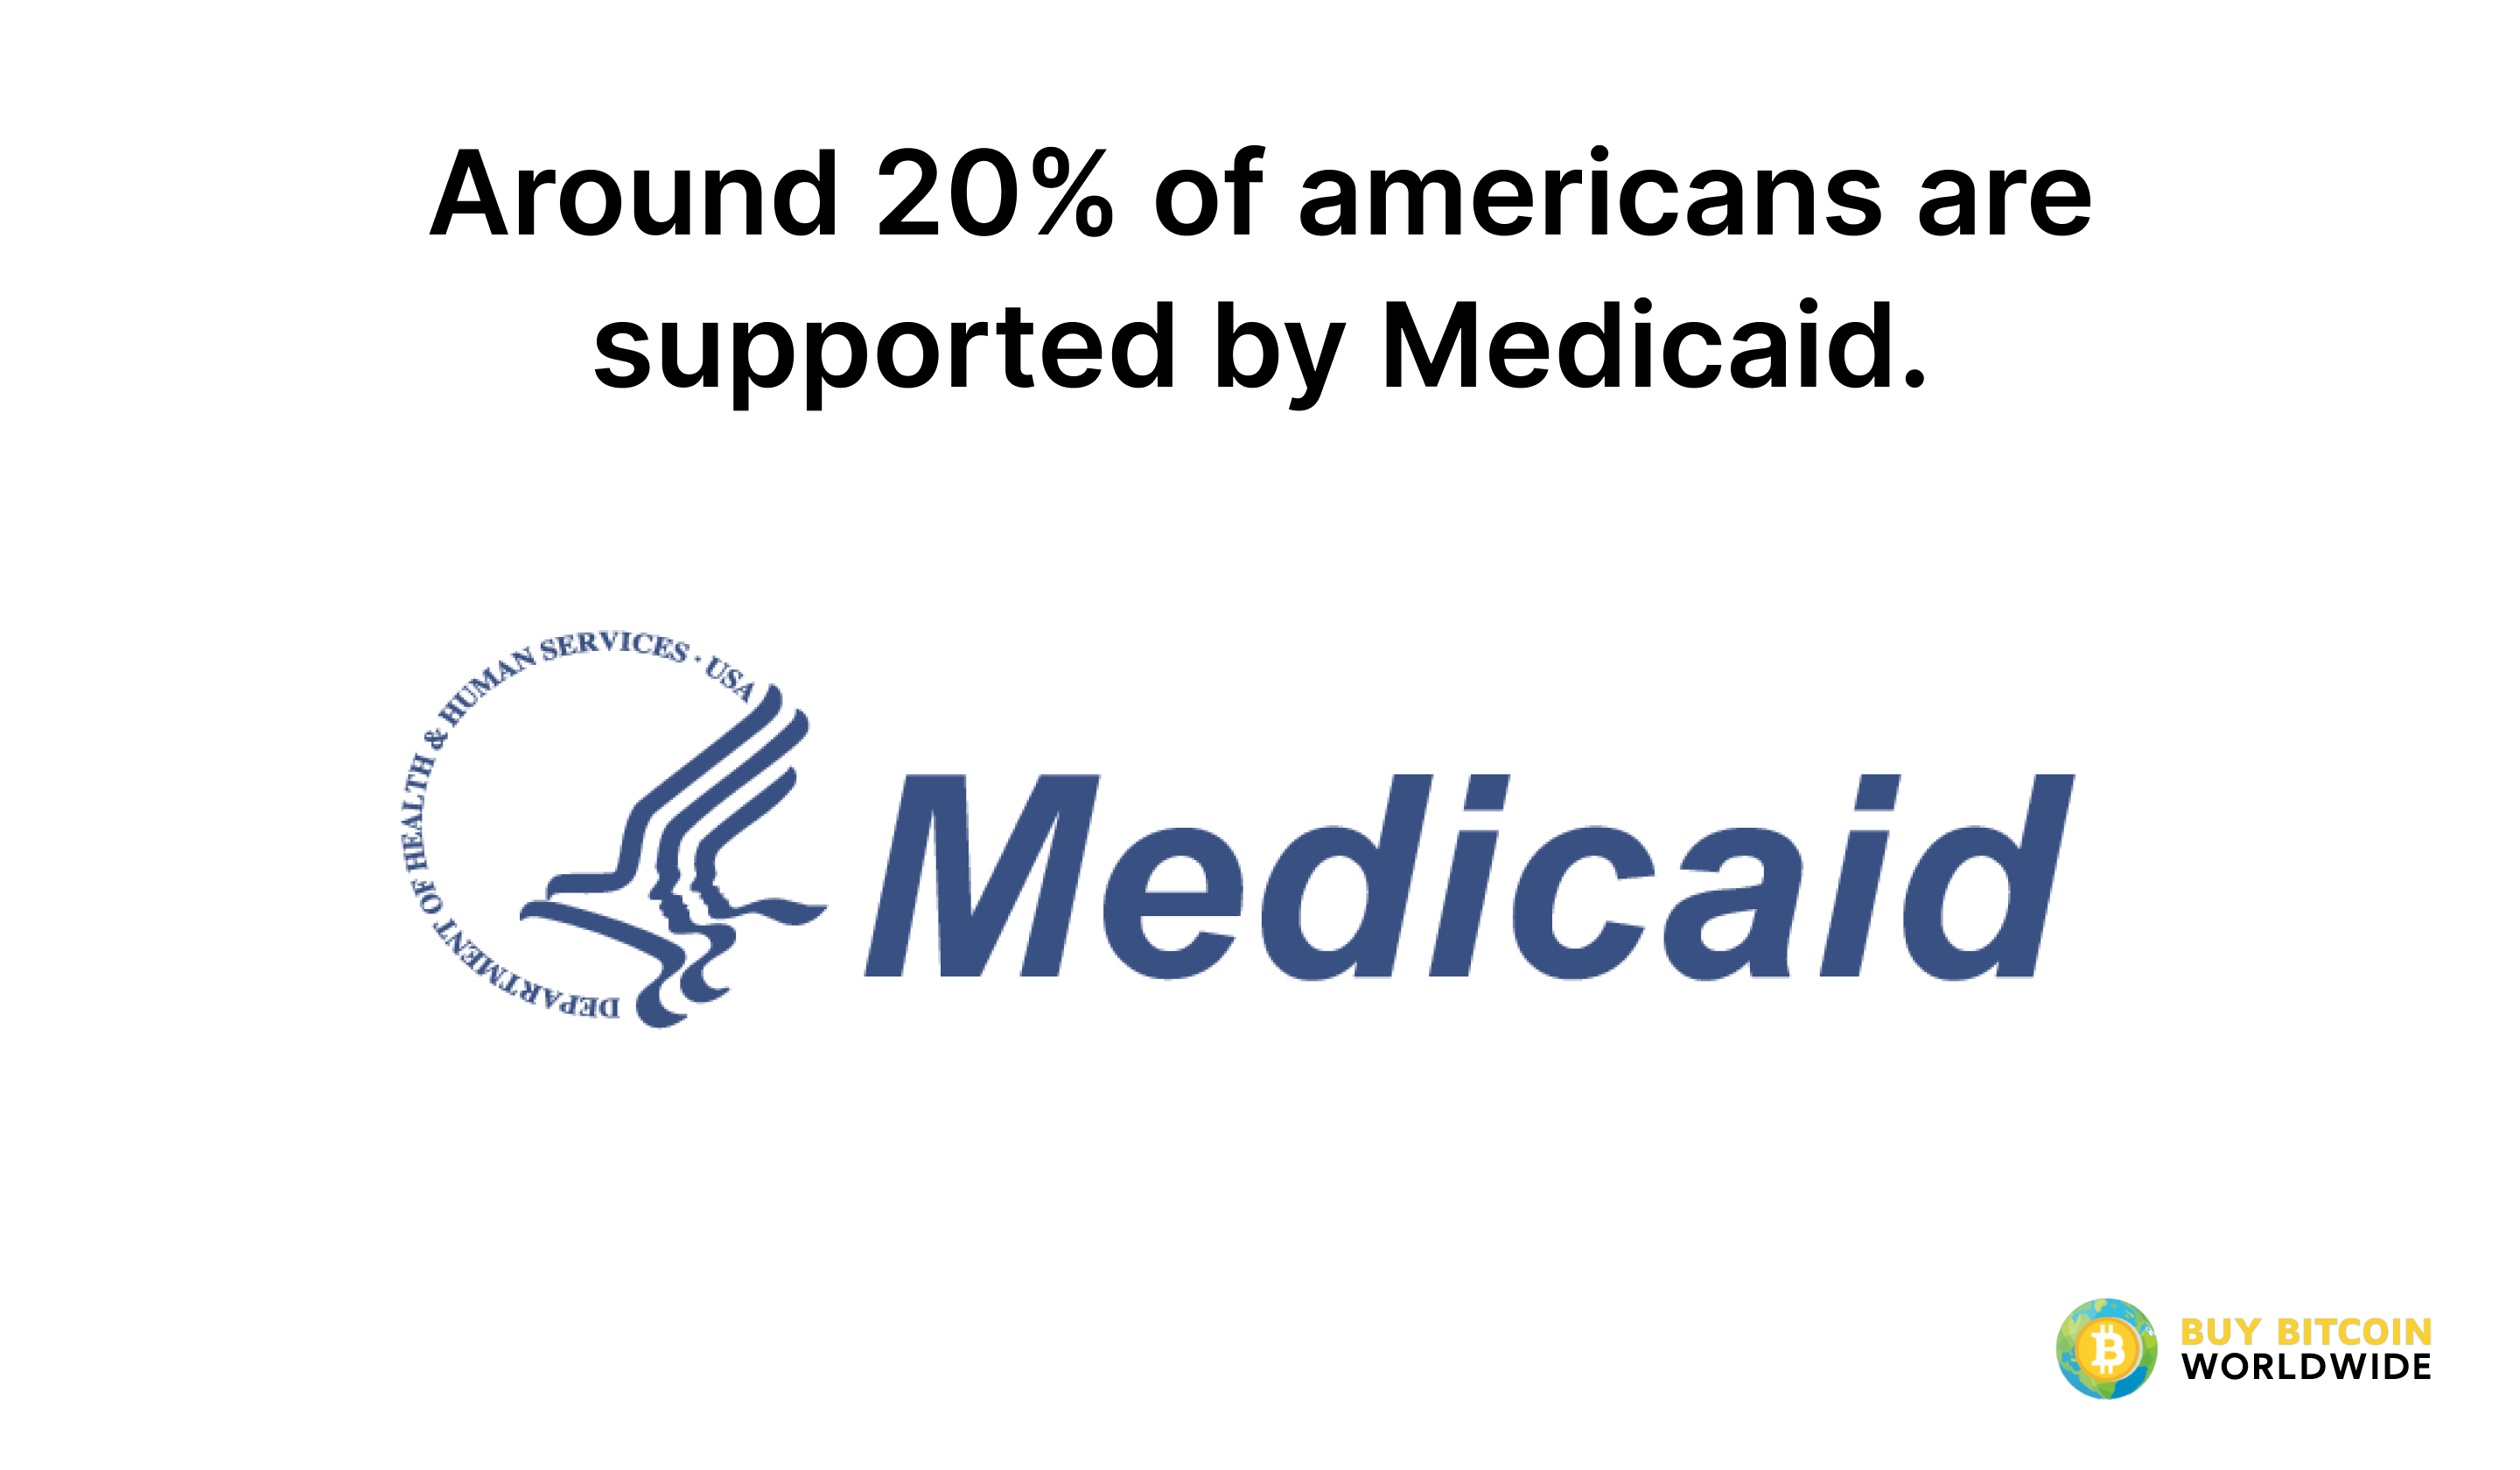 percentage of americans who are supported by medicaid